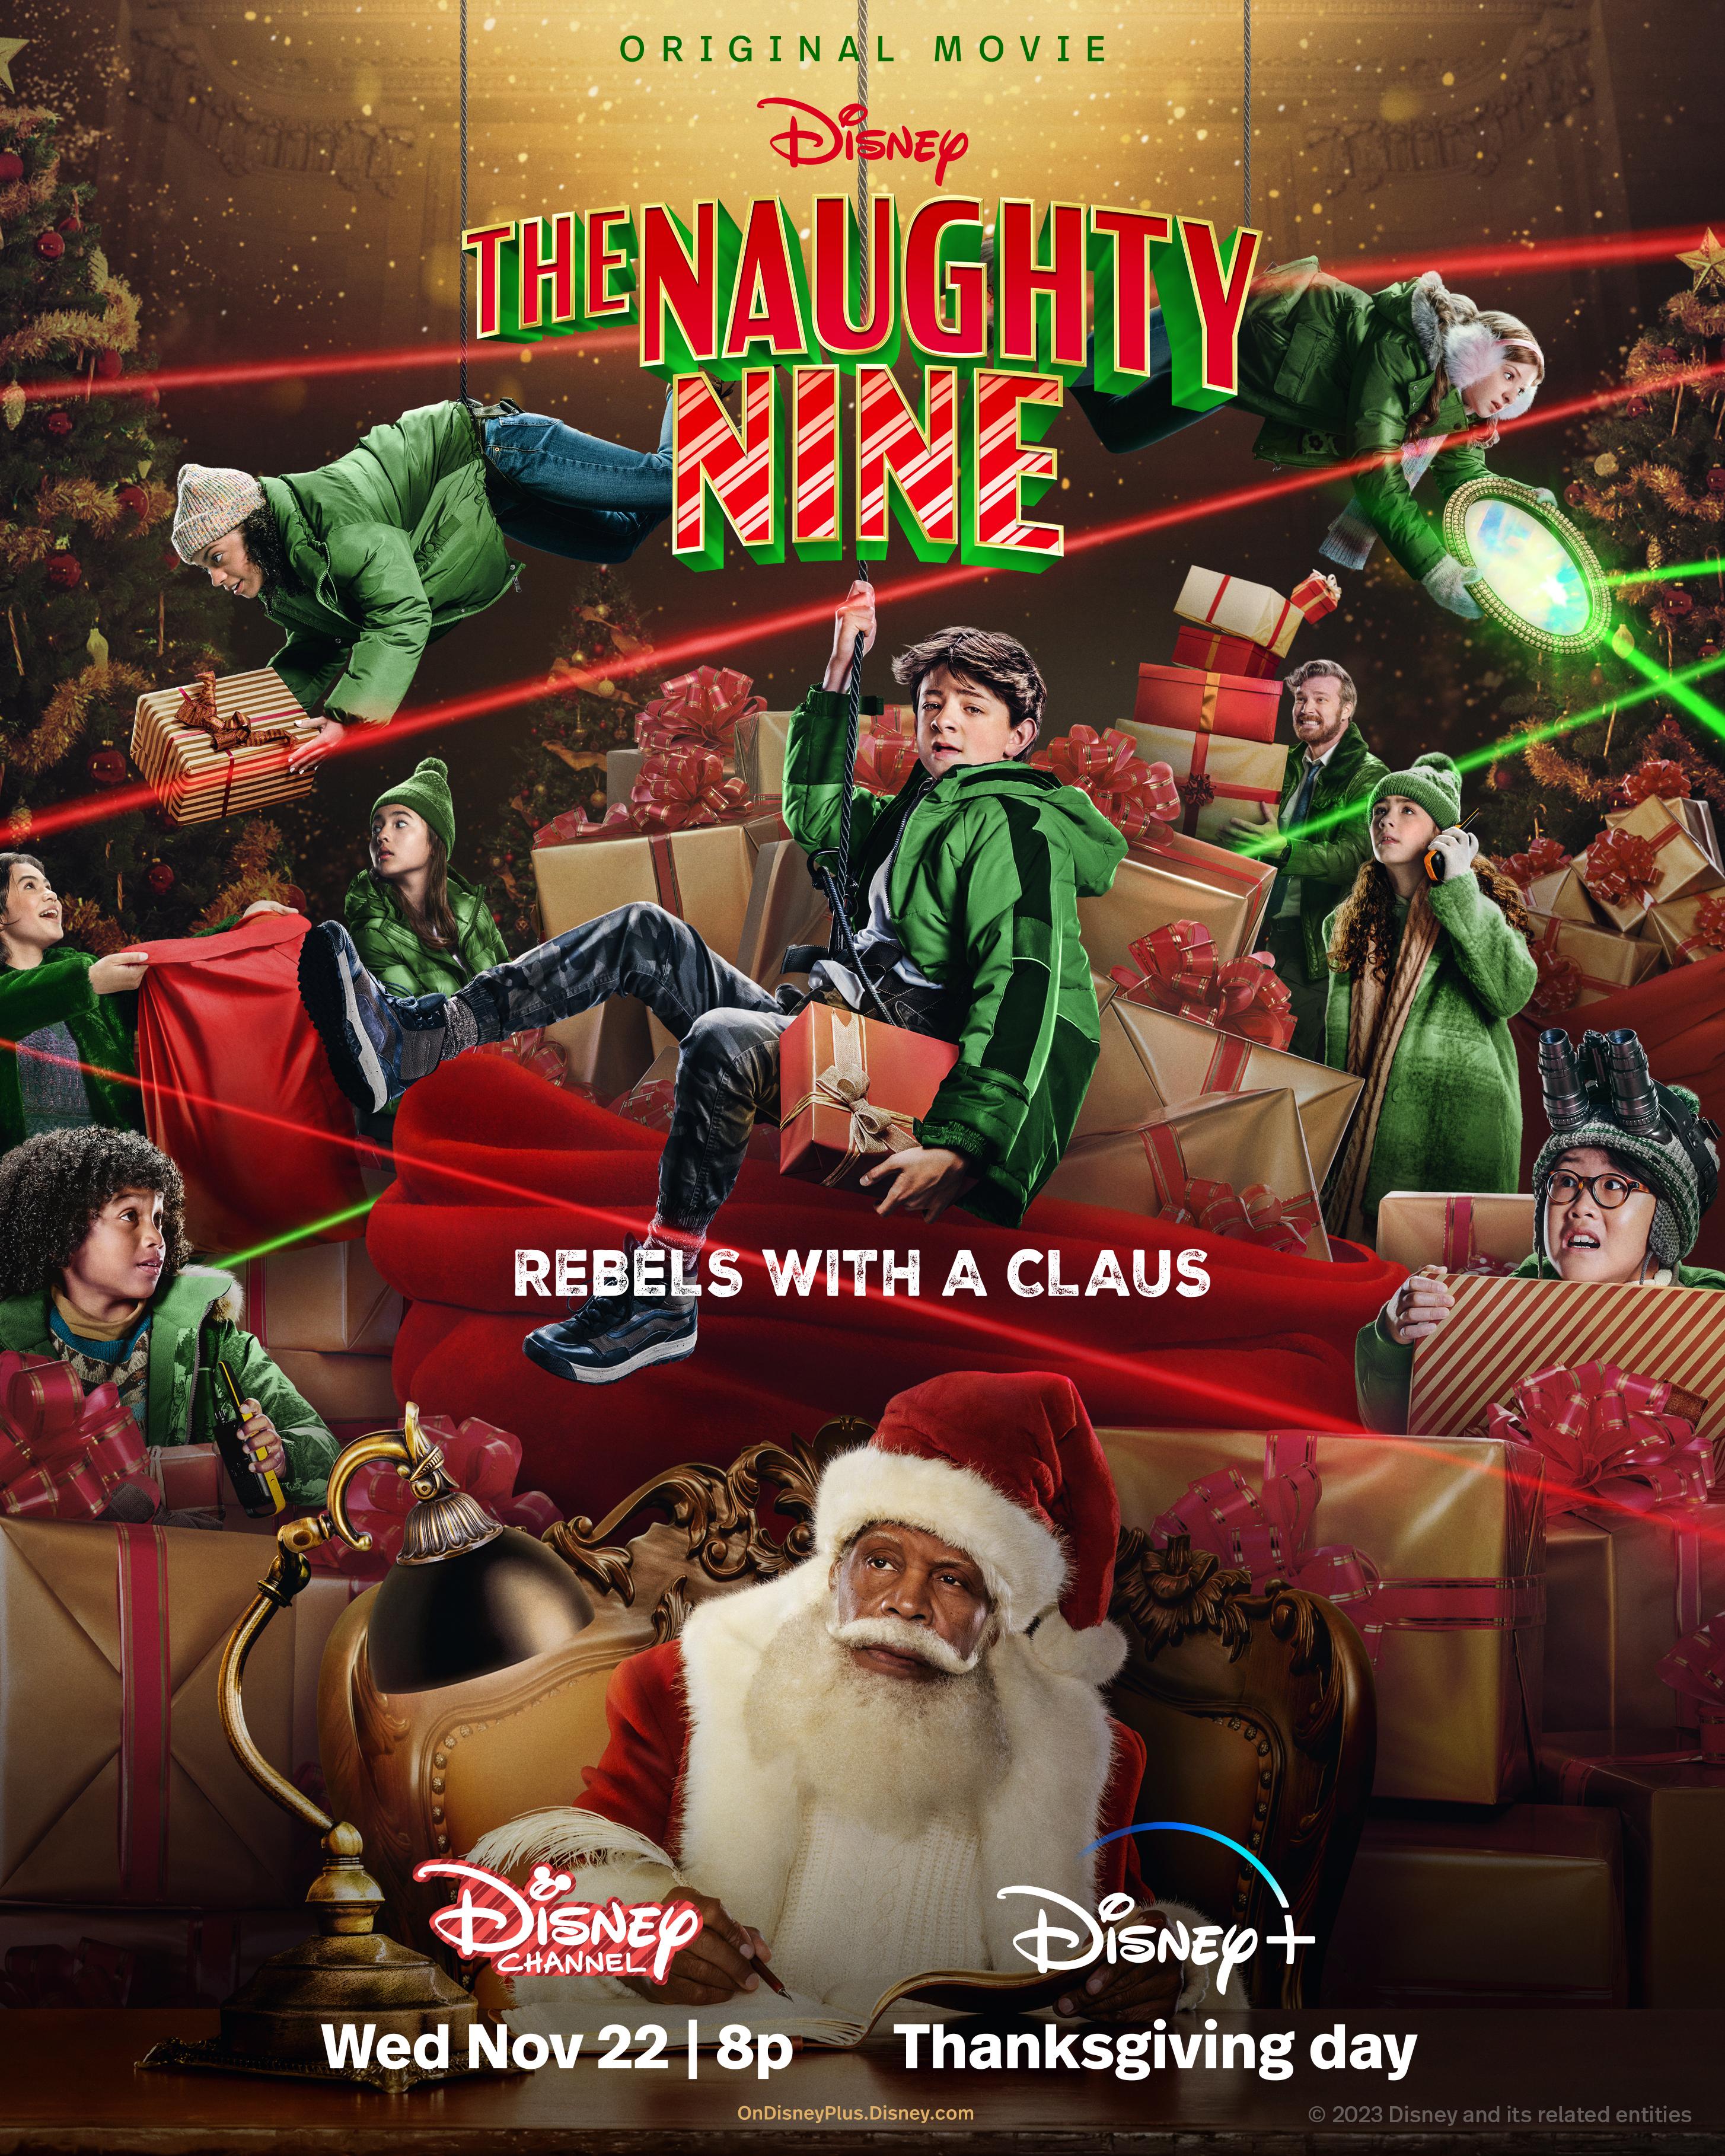 https://static.wikia.nocookie.net/disney/images/1/16/The_Naughty_Nine_Poster.jpeg/revision/latest?cb=20231027180748